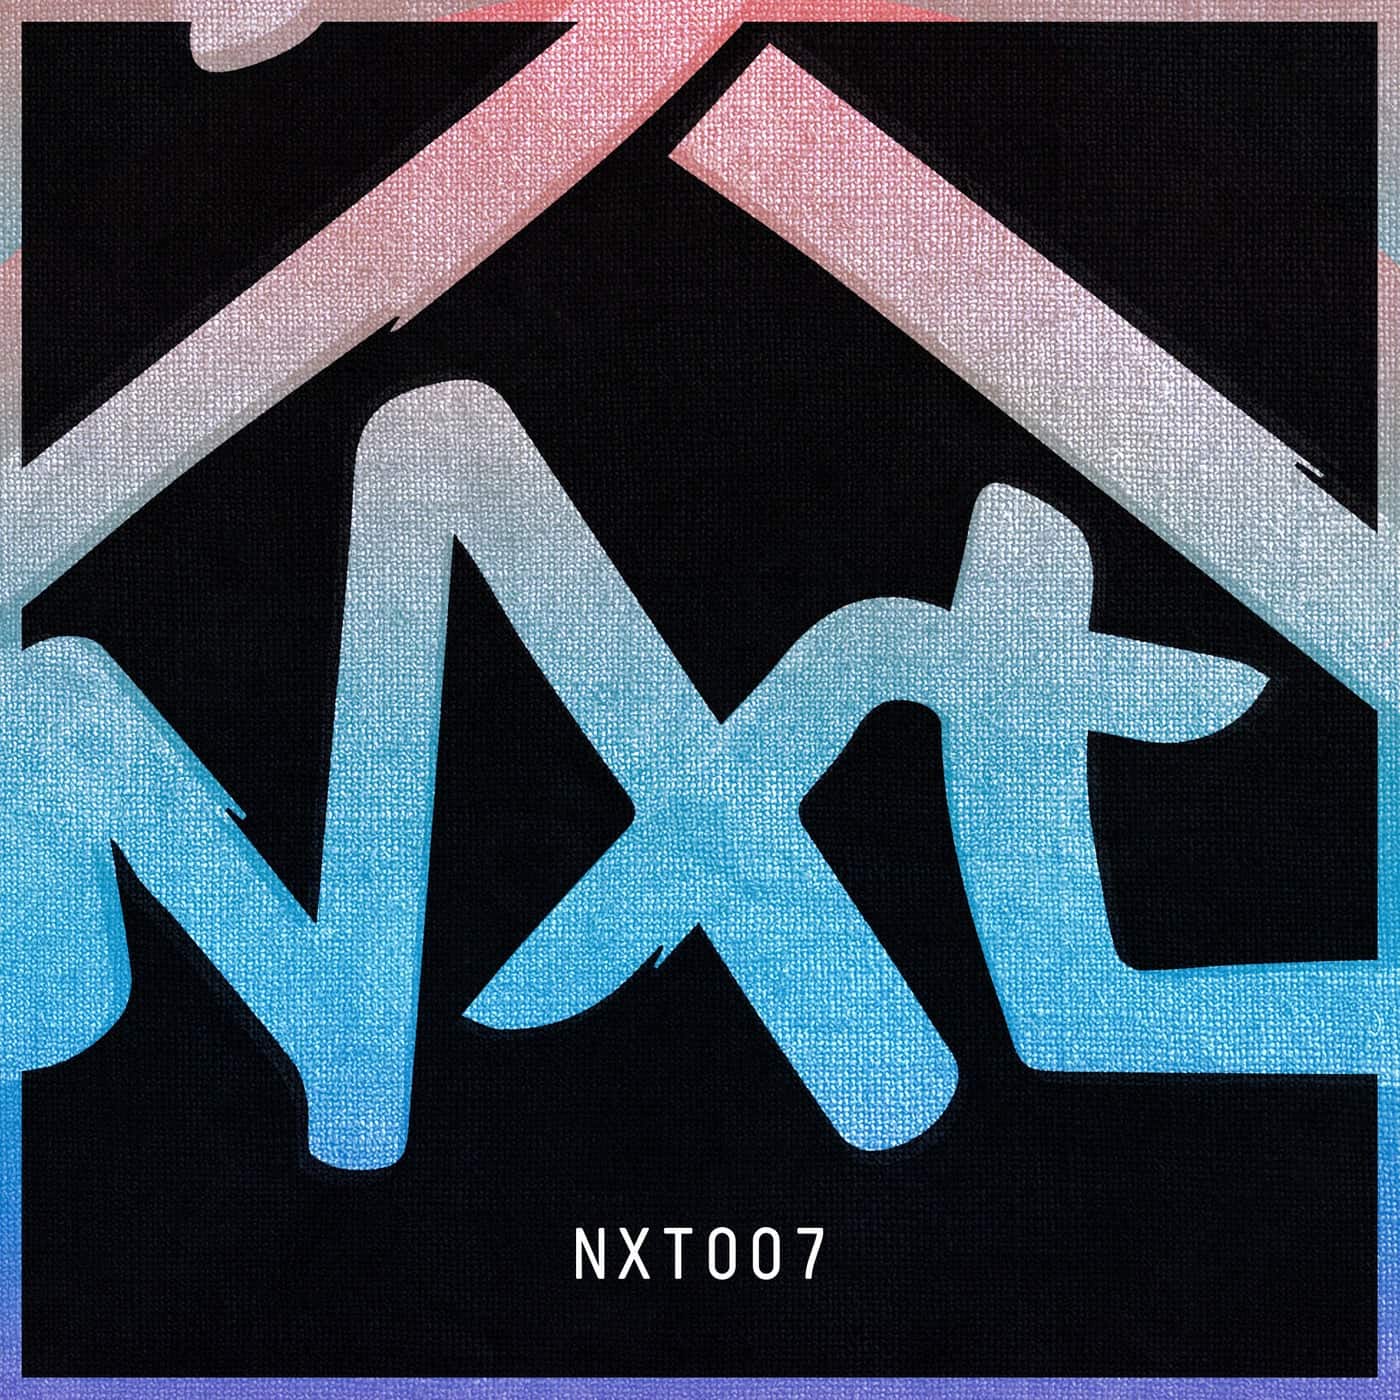 Download NXT007 on Electrobuzz